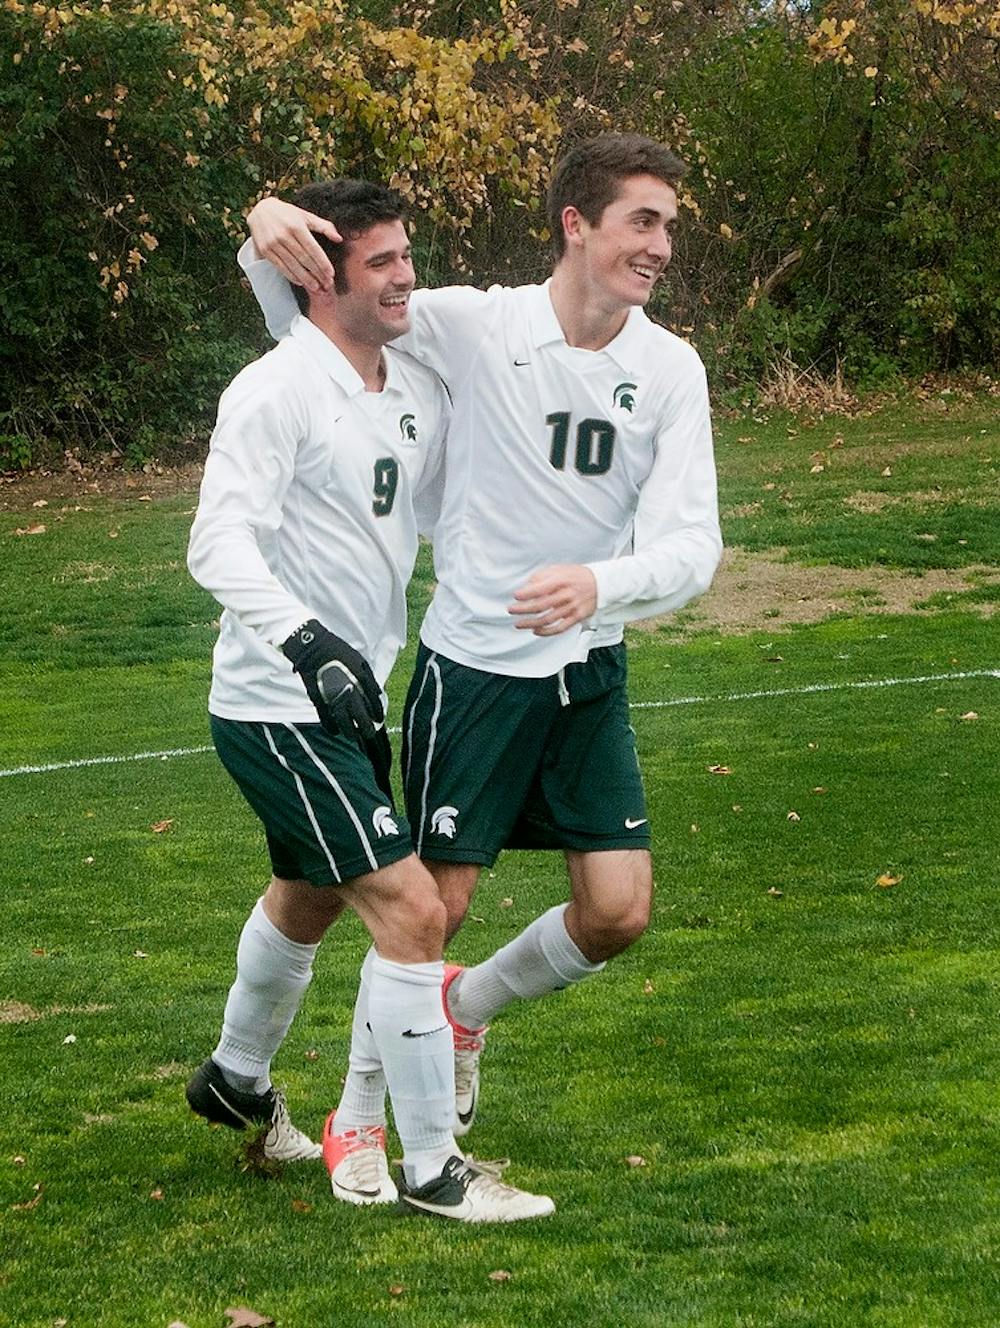 Freshman midfielders Sean Conerty, left, and Jay Chapman embrace after Chapman's second goal of the game Oct. 28, 2012, at DeMartin Stadium at Old College Field. Chapman recorded his first three collegiate goals during the game, leading the Spartans to a 3-1 victory over the Hoosiers. Natalie Kolb/The State News